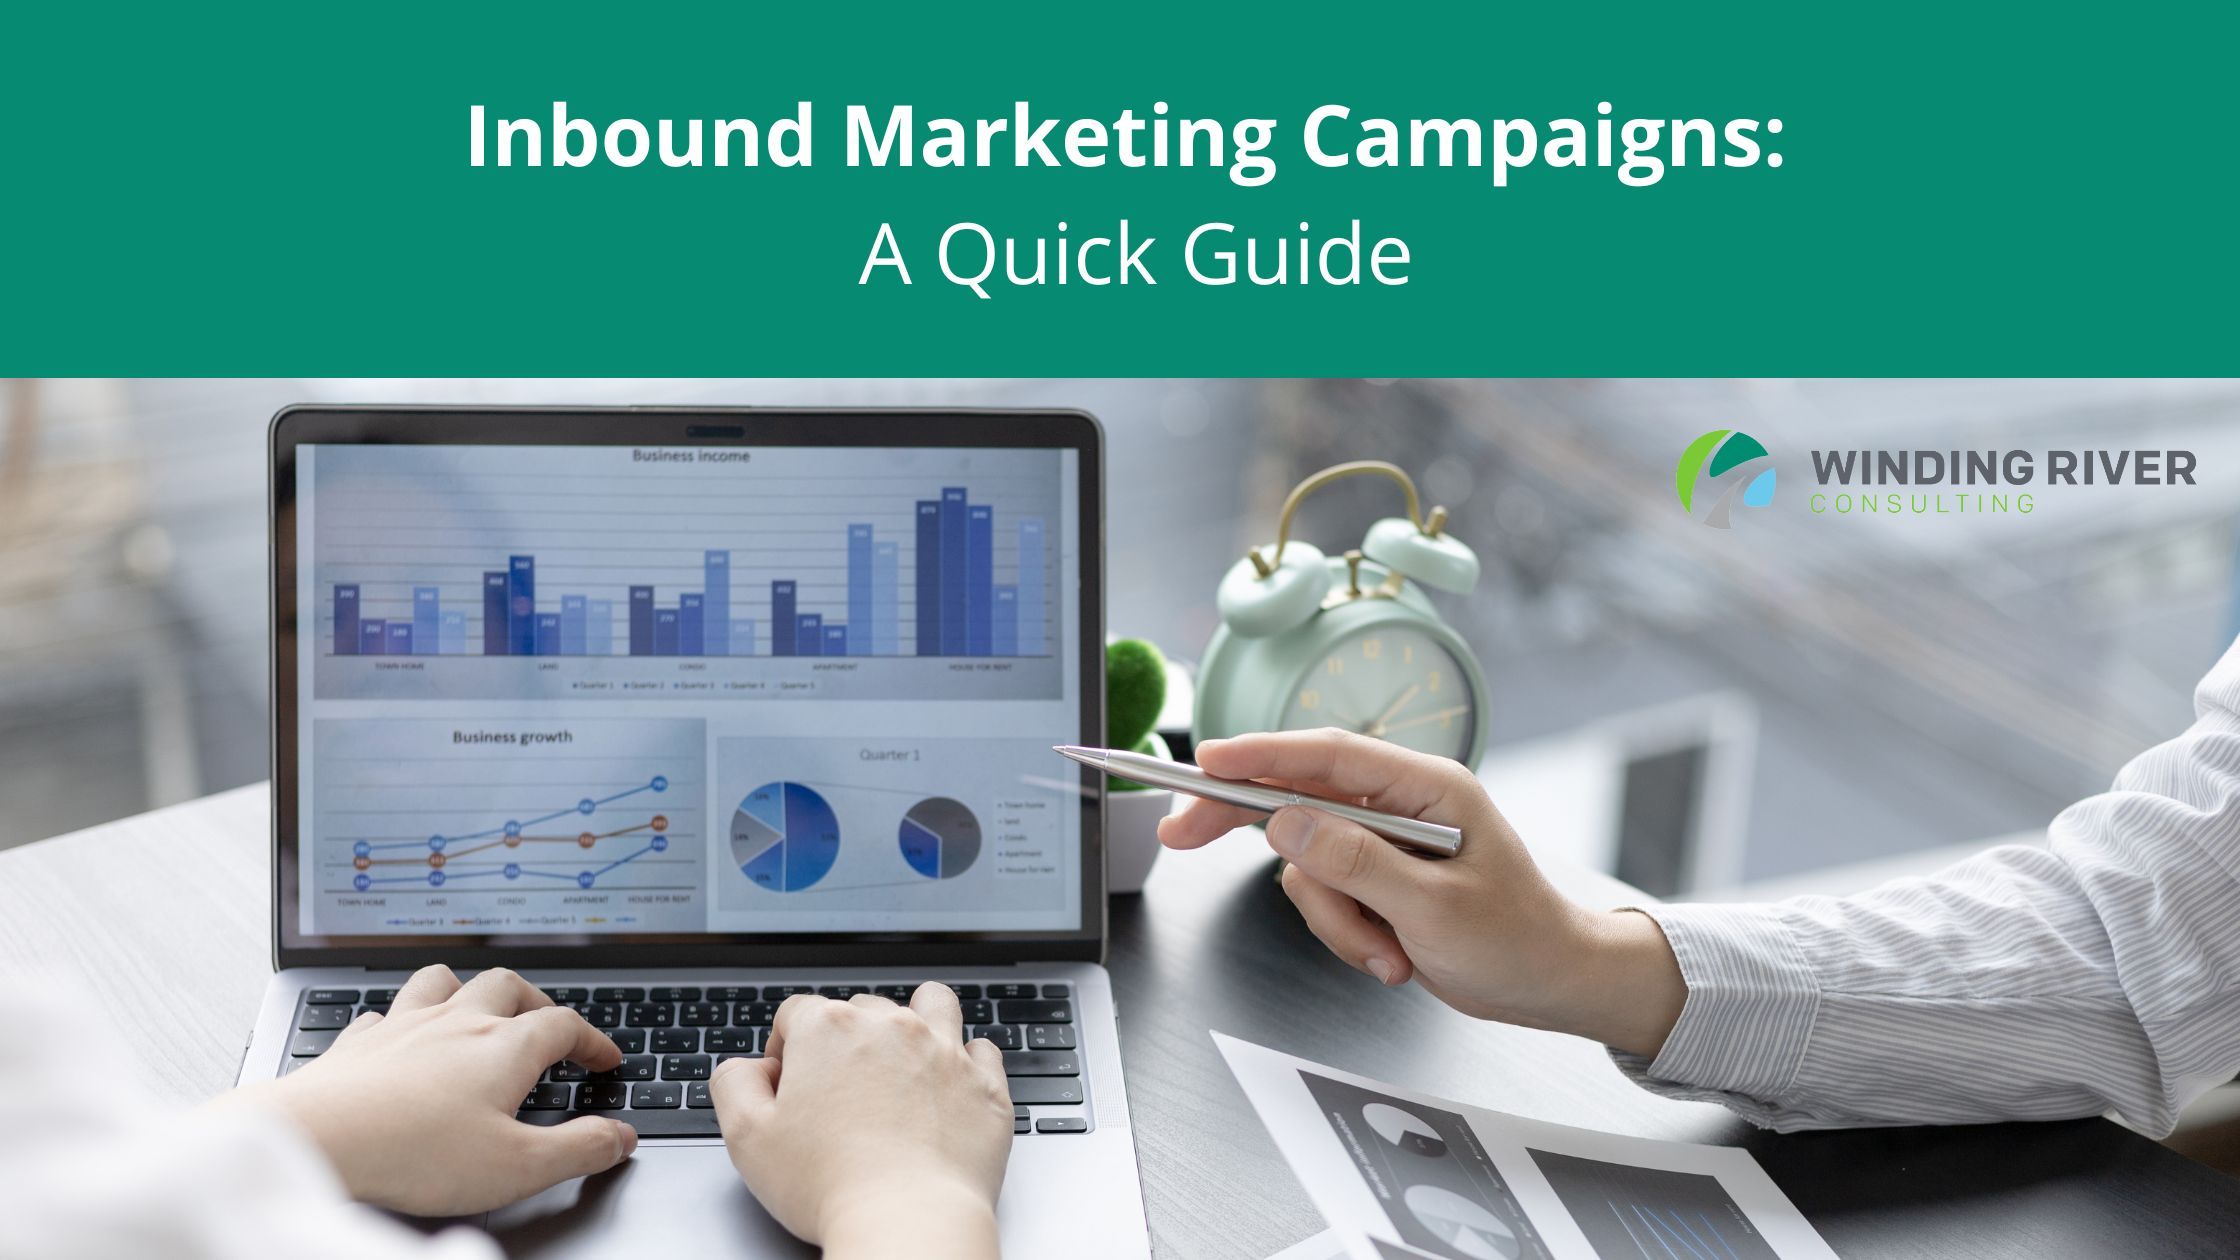 Inbound Marketing Campaigns: A Quick Guide